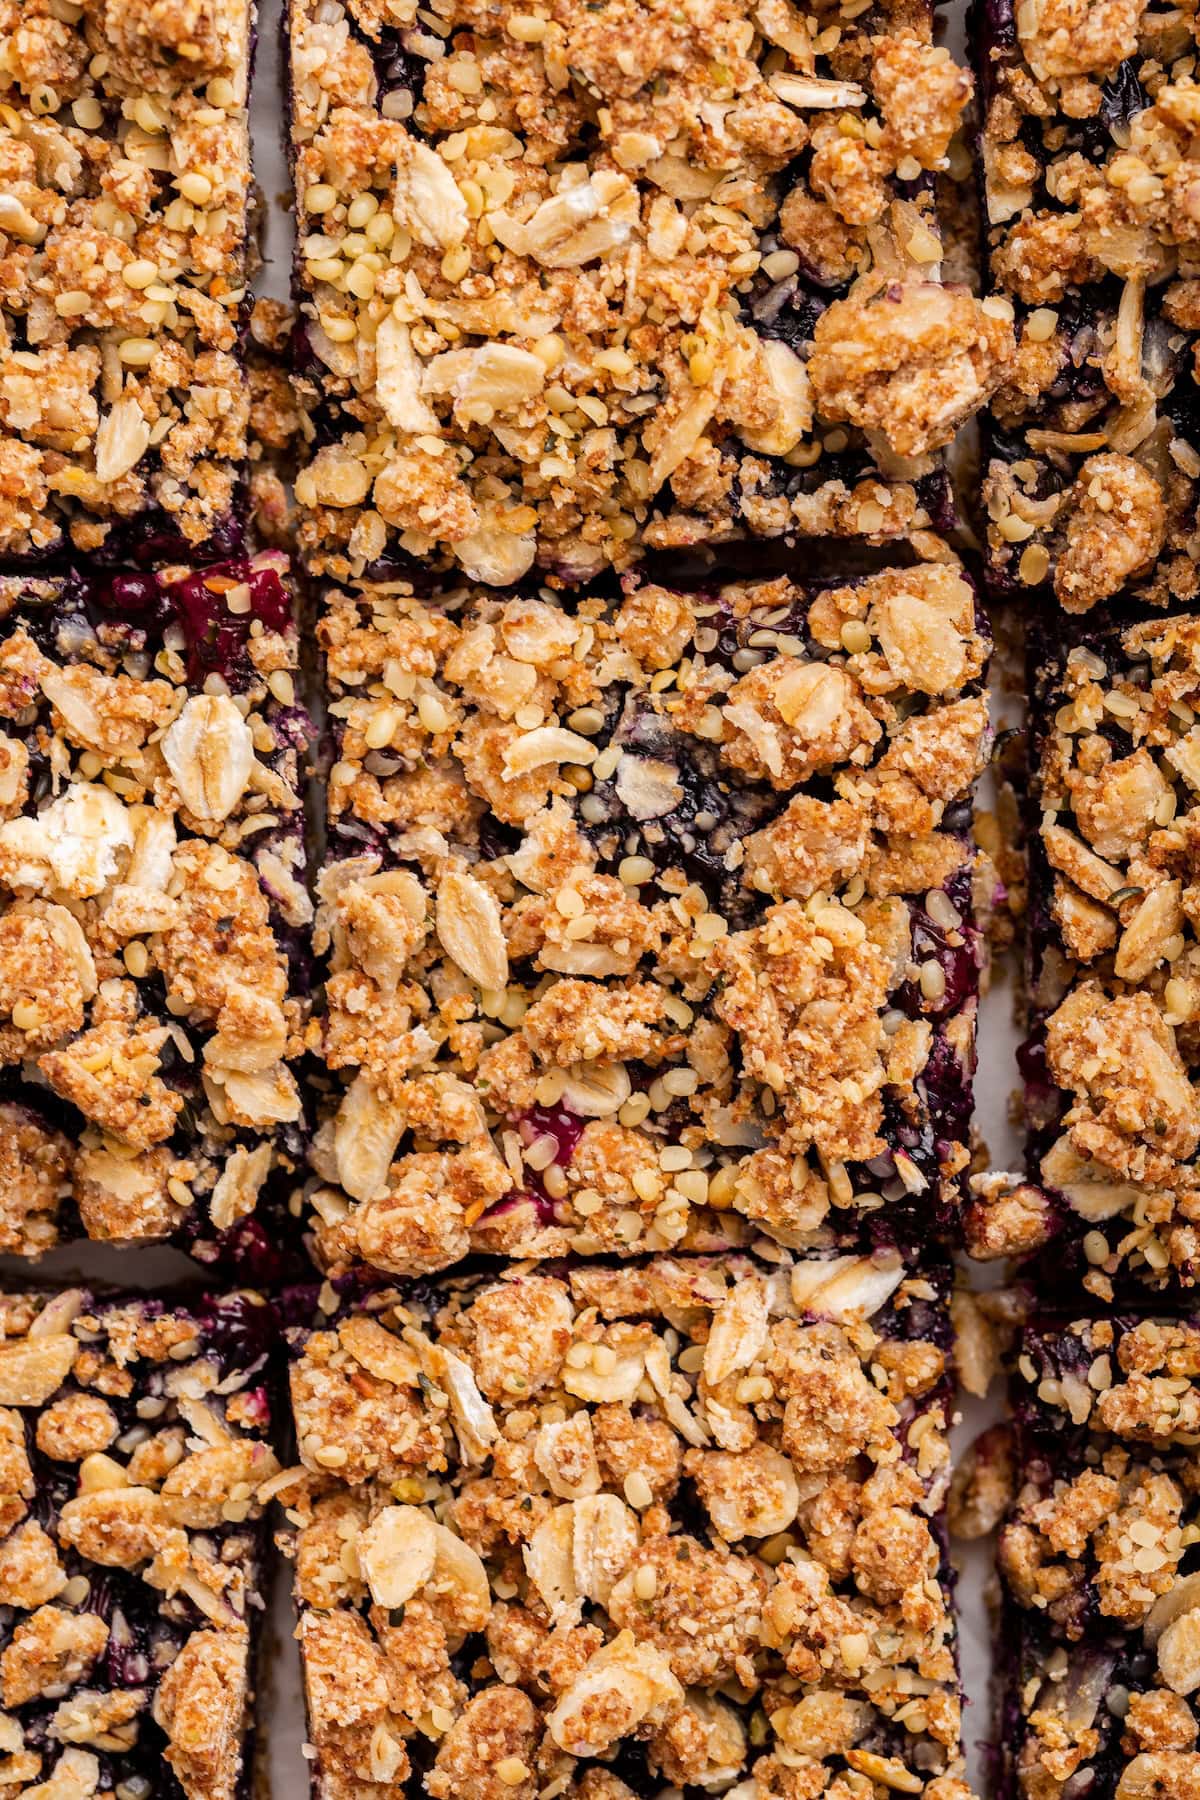 Blueberry crumble bars near one another.